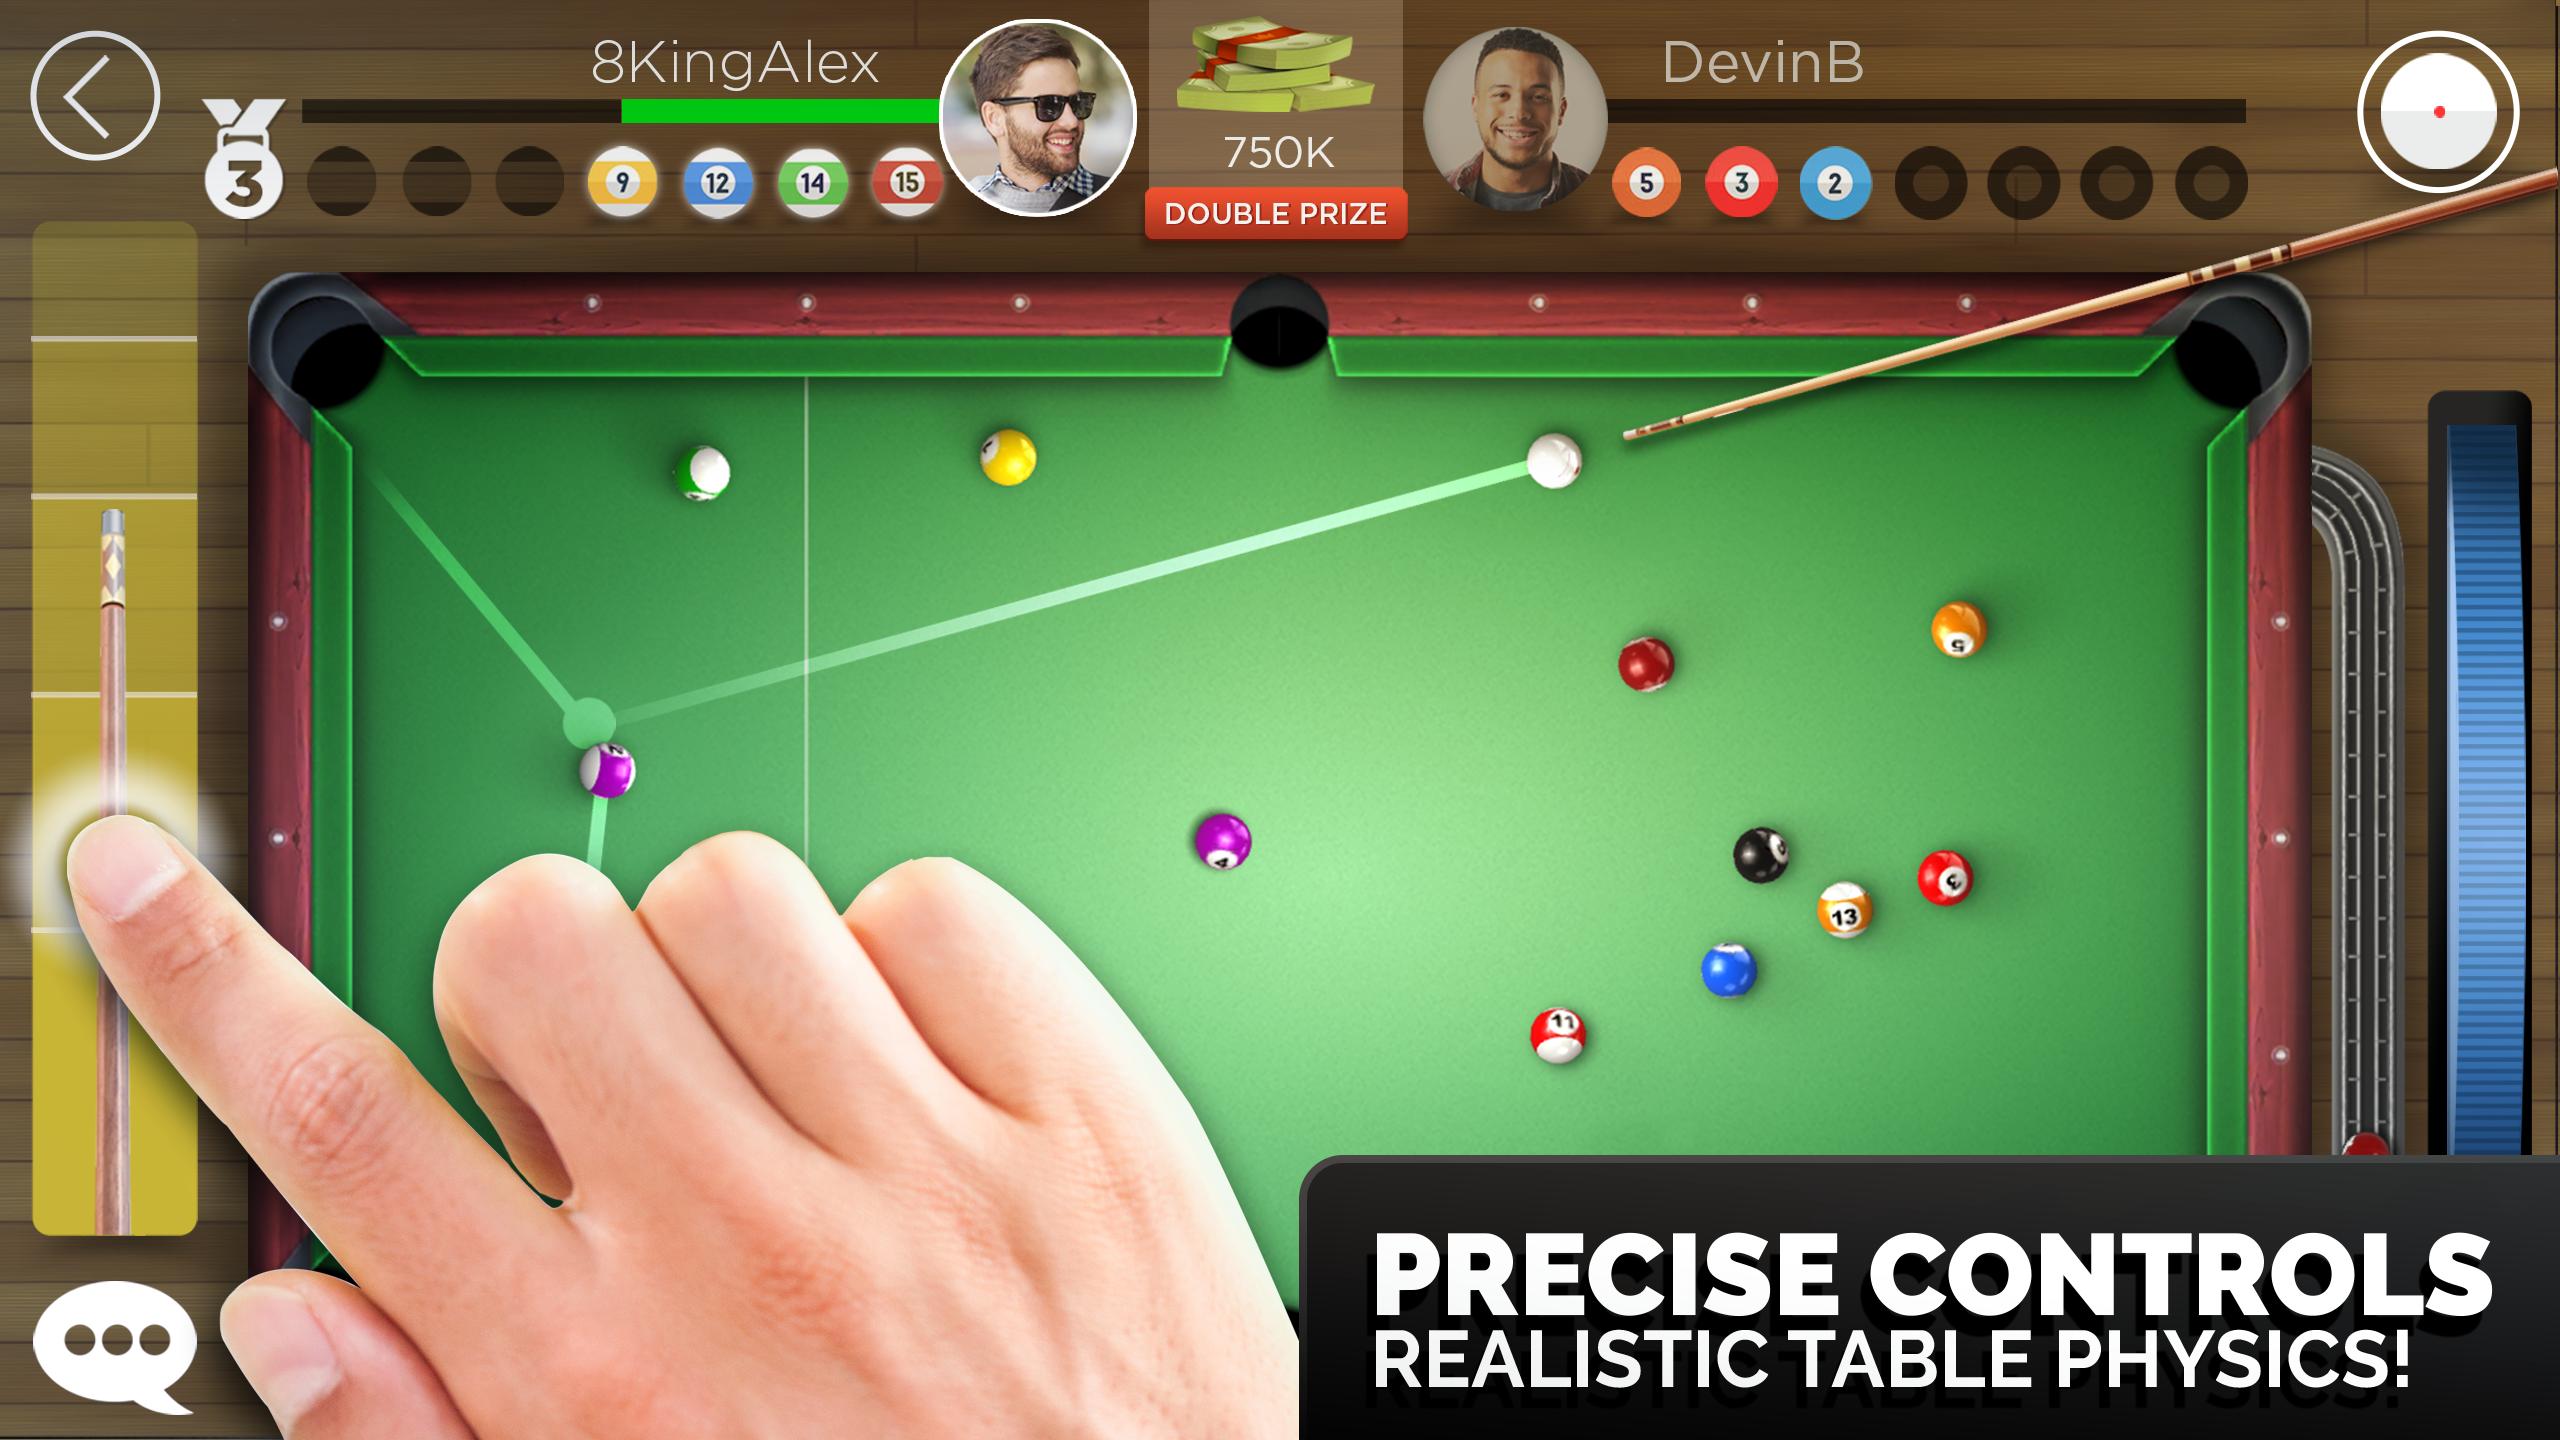 Kings of Pool for Android - APK Download - 